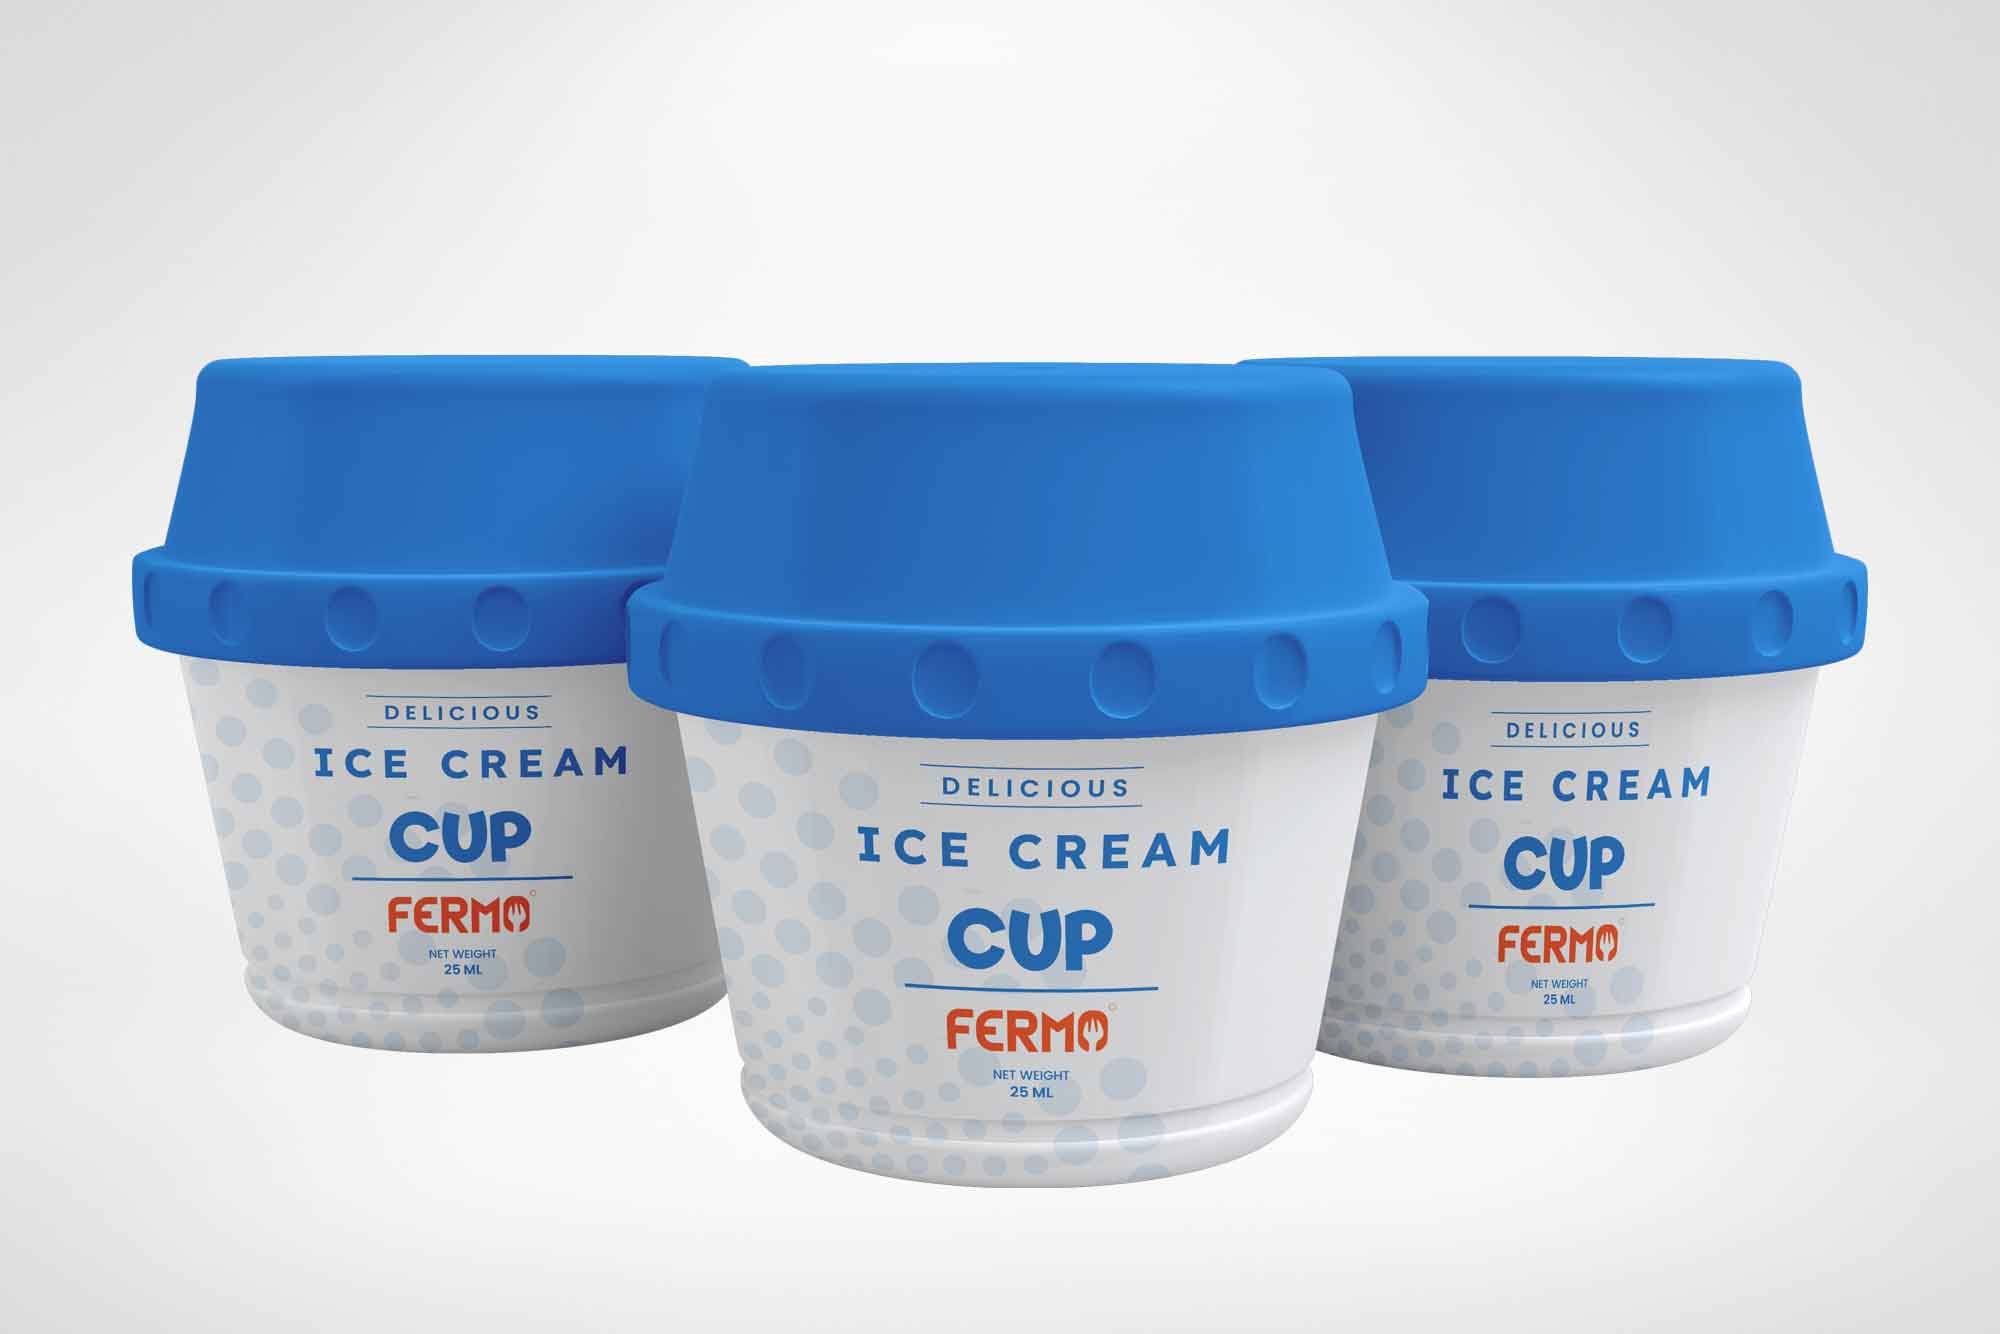 ice cream cup with Lid